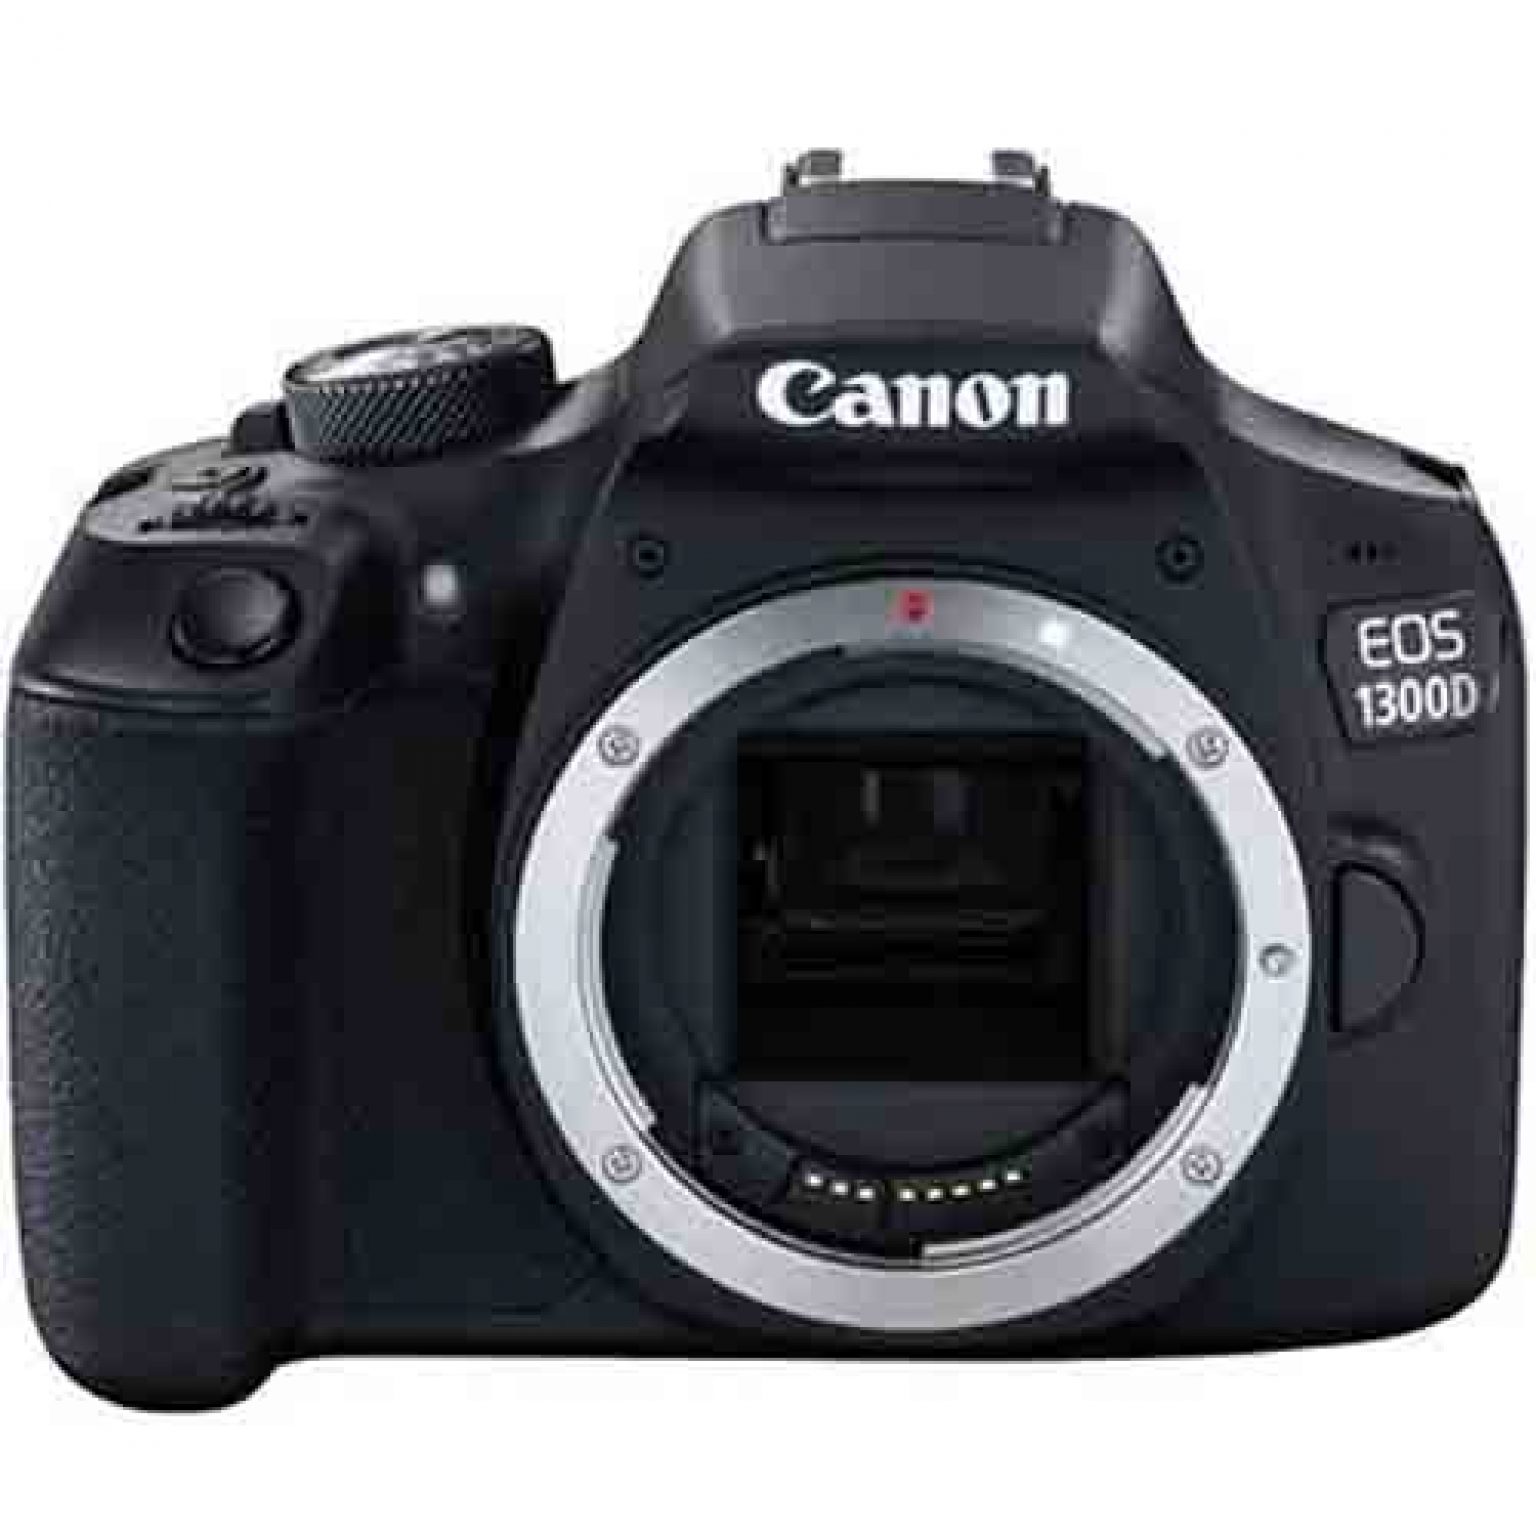 Canon EOS 3000D DSLR Camera With 18-55mm Lens Price in Pakistan 2020